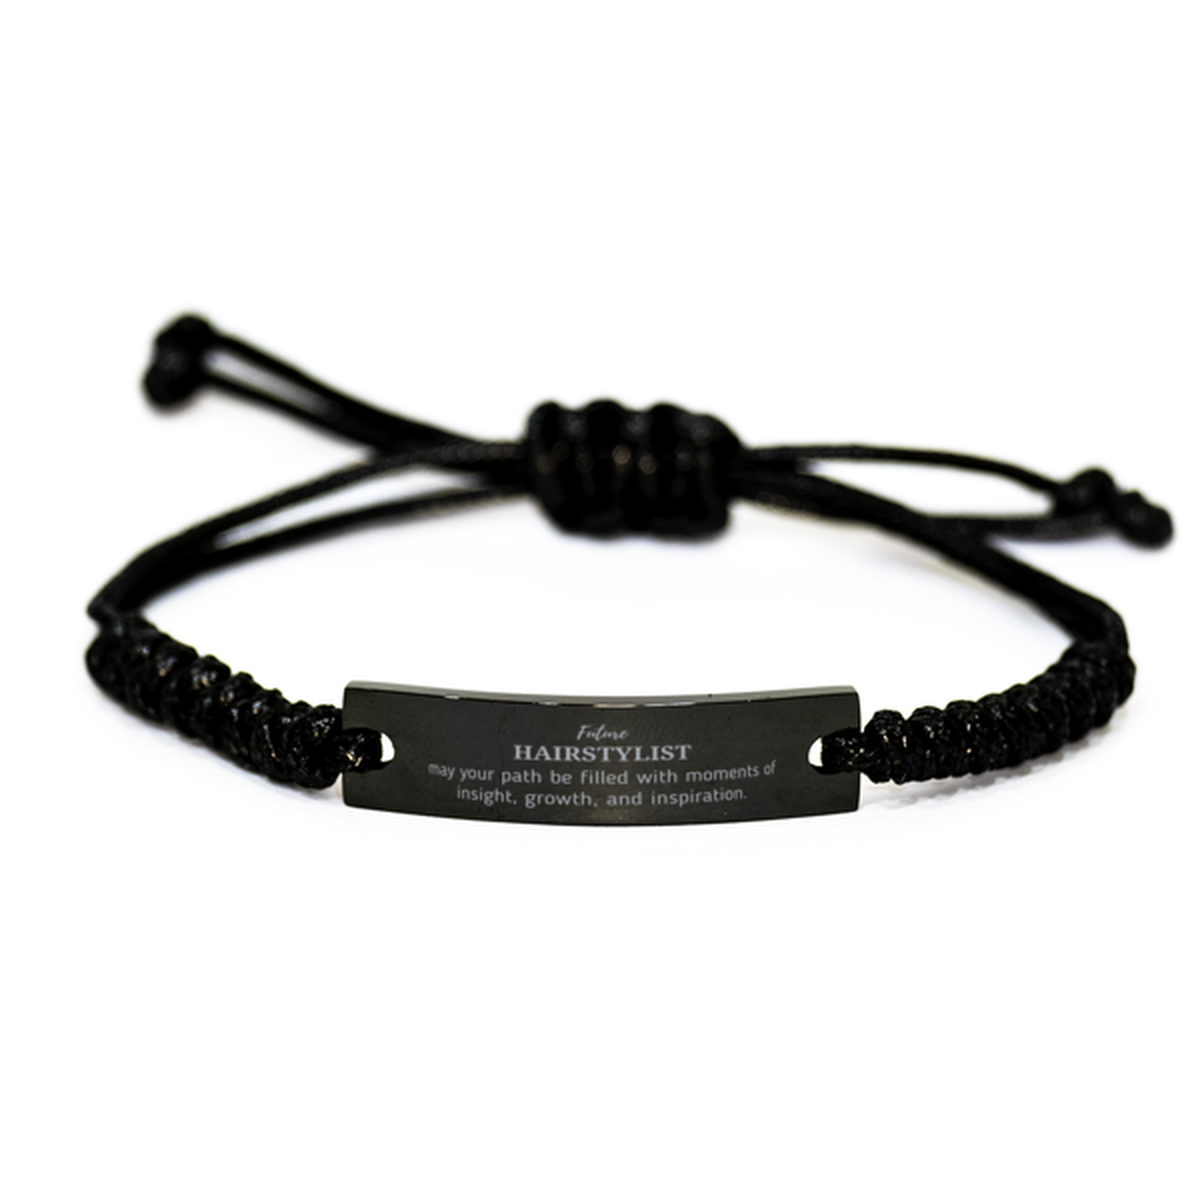 Future Hairstylist Gifts, May your path be filled with moments of insight, Graduation Gifts for New Hairstylist, Christmas Unique Black Rope Bracelet For Men, Women, Friends